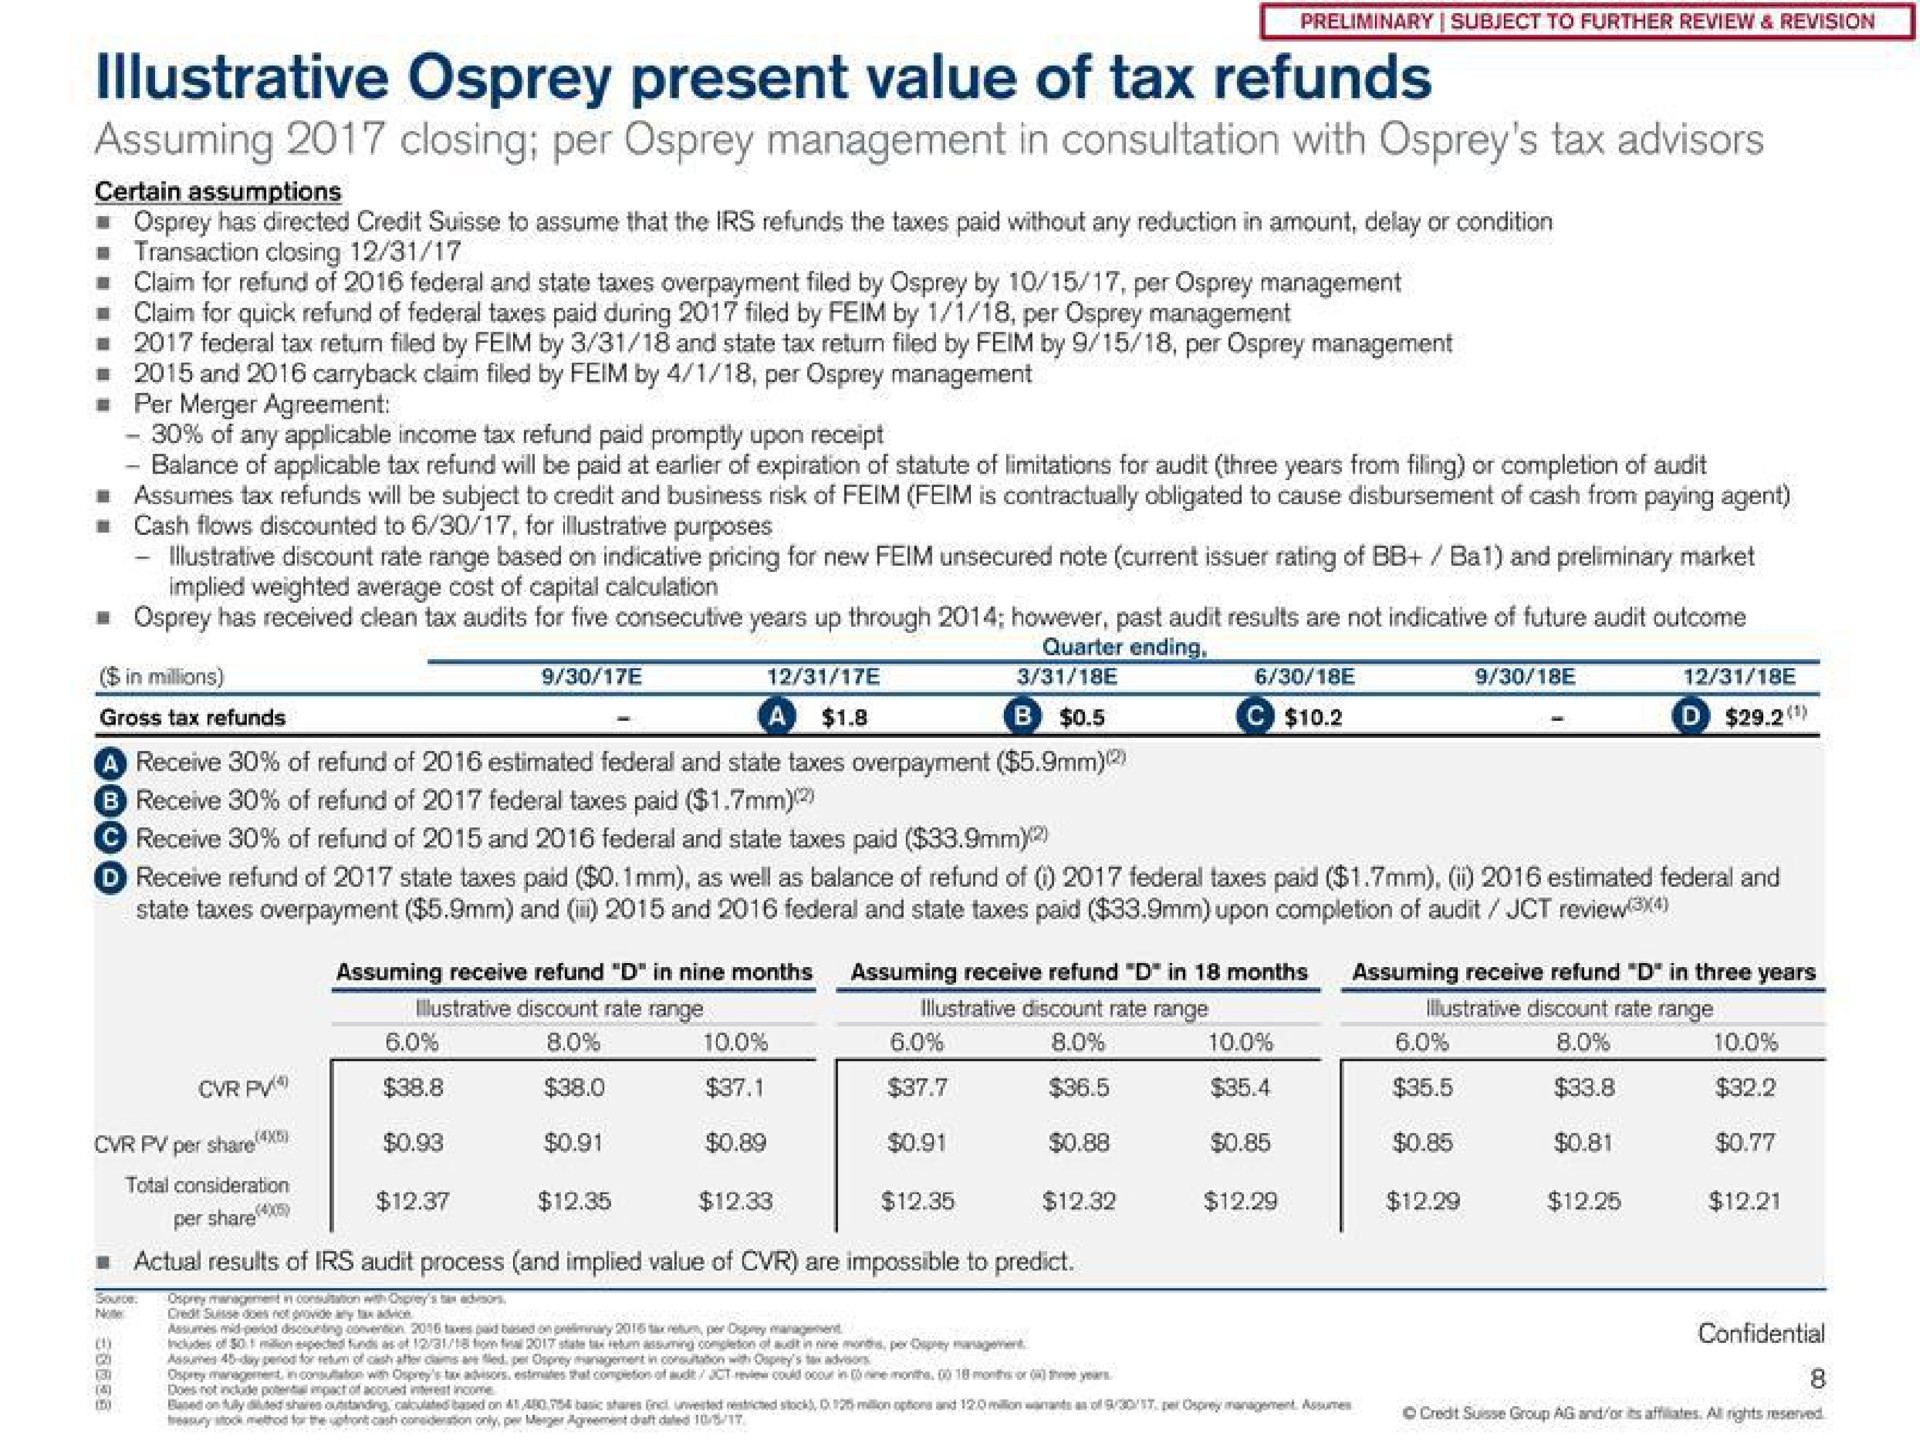 osprey present value of tax refunds assuming closing per osprey management in consultation with osprey tax advisors | Credit Suisse